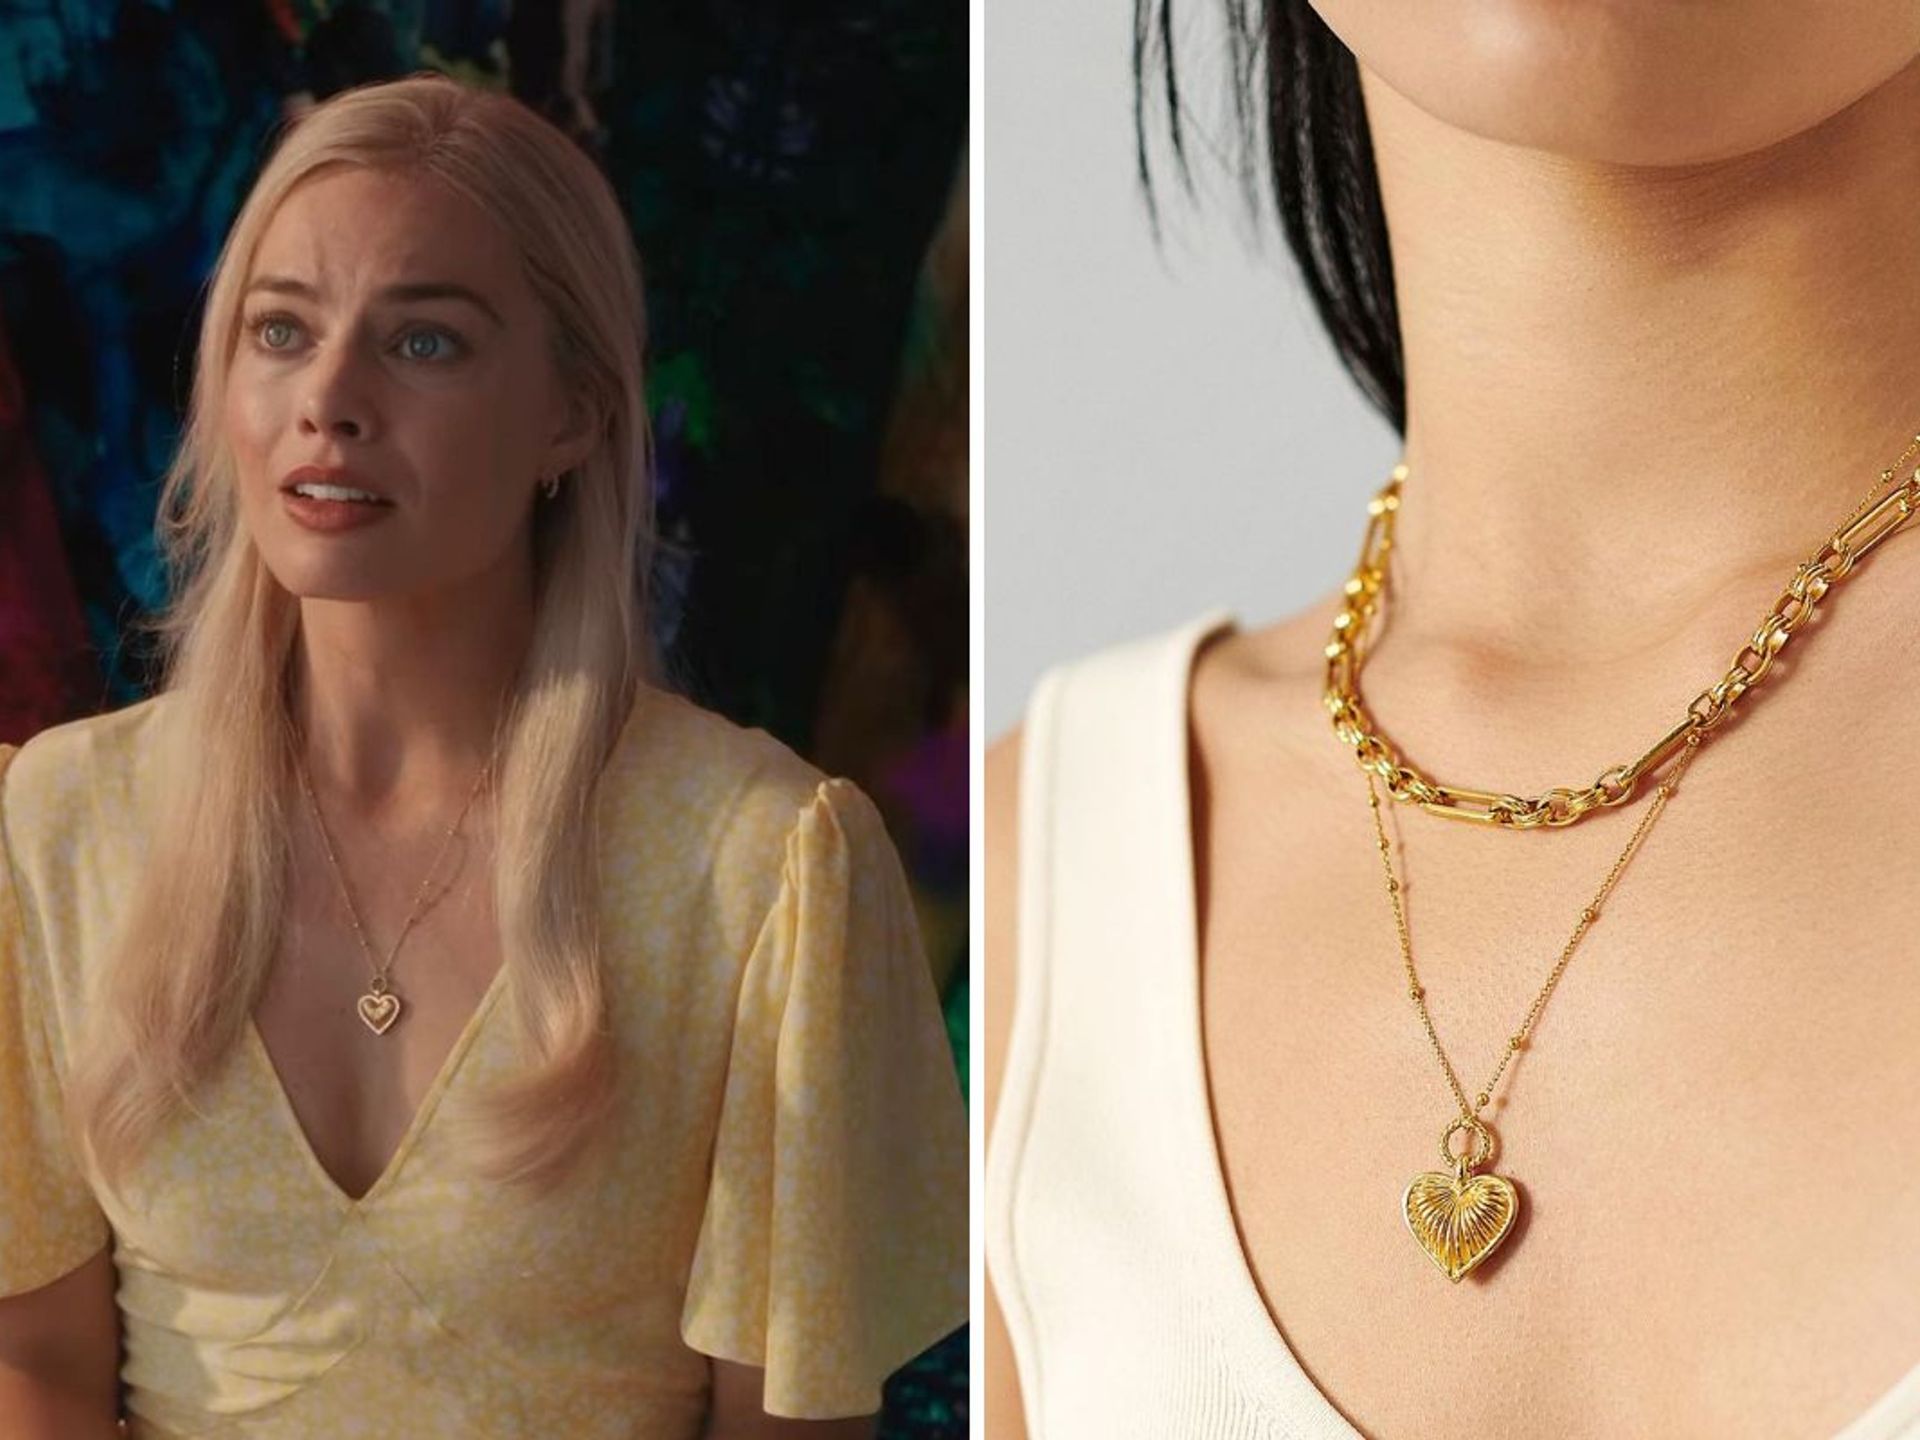 Margot Robbie's Barbie heart necklace is from Meghan Markle's